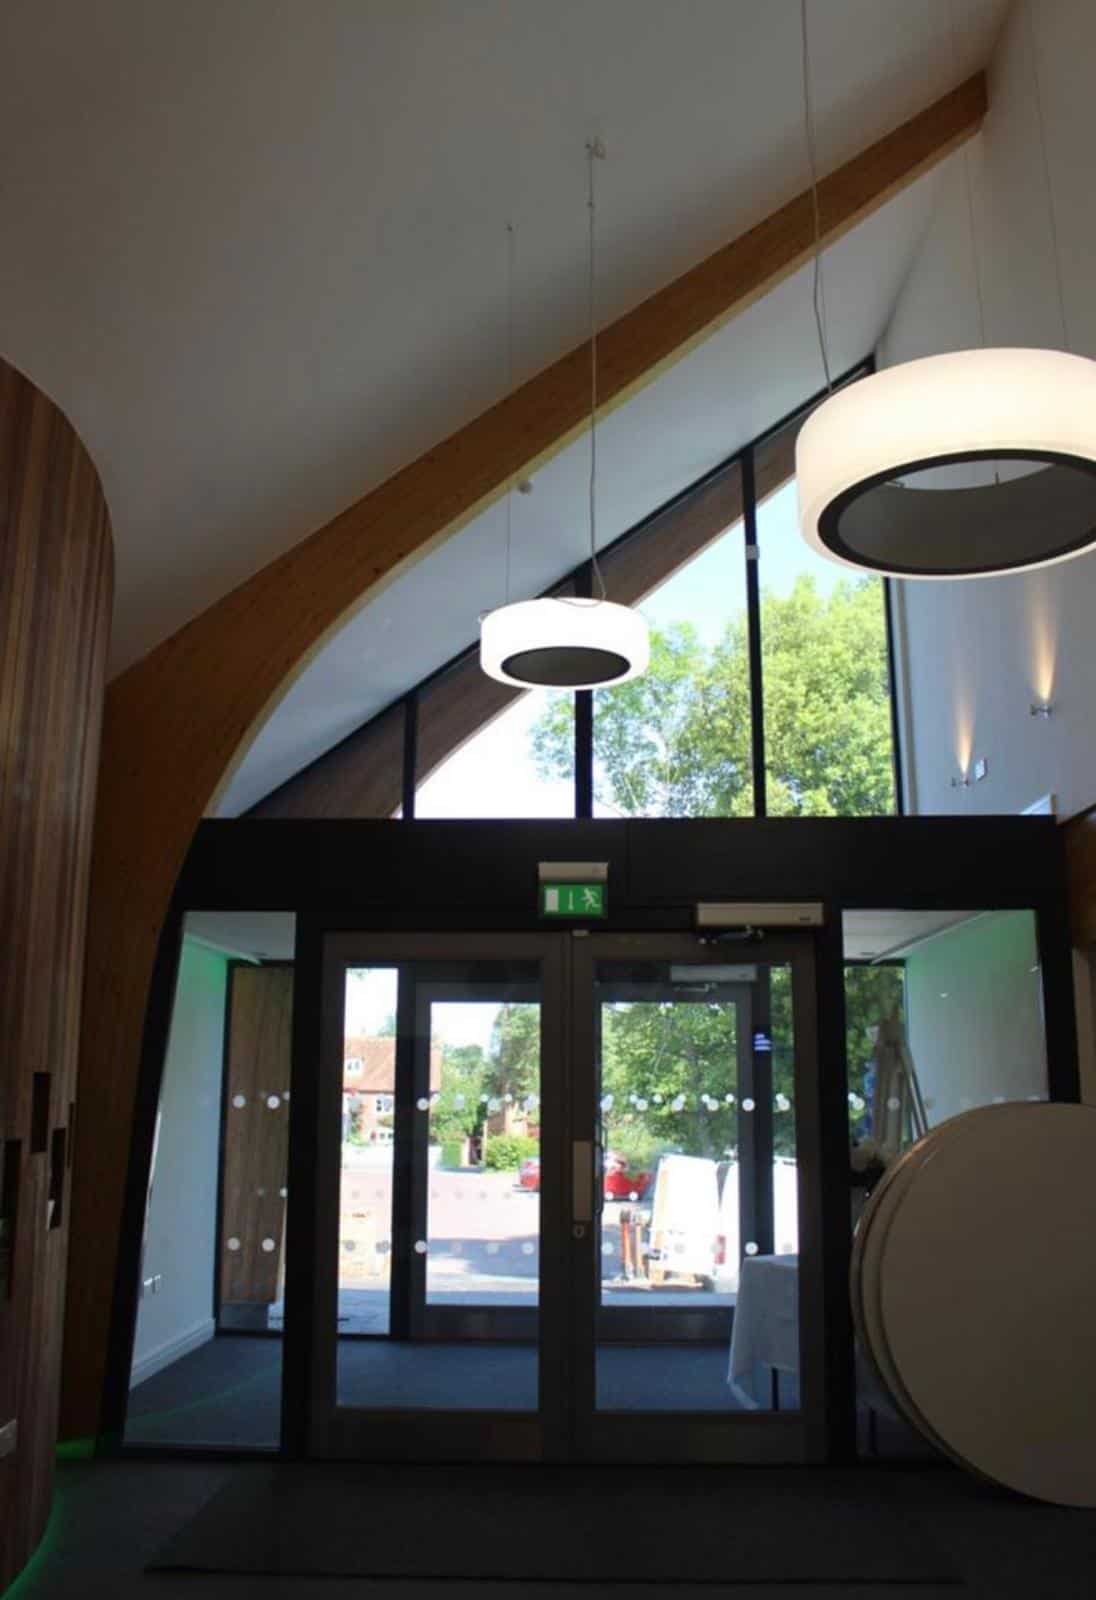 Entrance of the Herne Community Centre showing the main doors